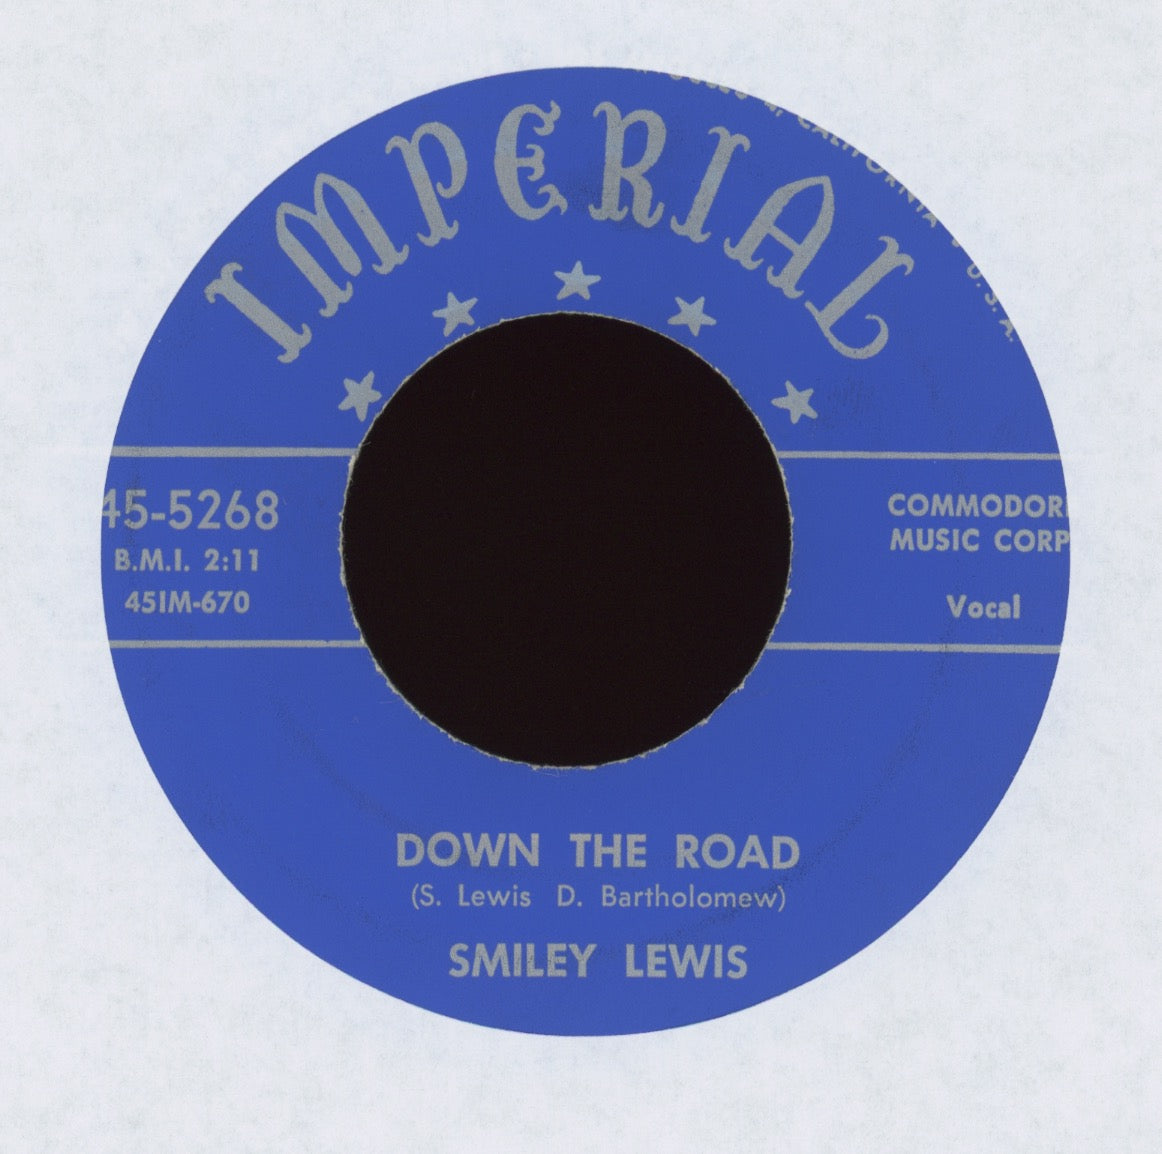 Smiley Lewis - Down The Road on Imperial